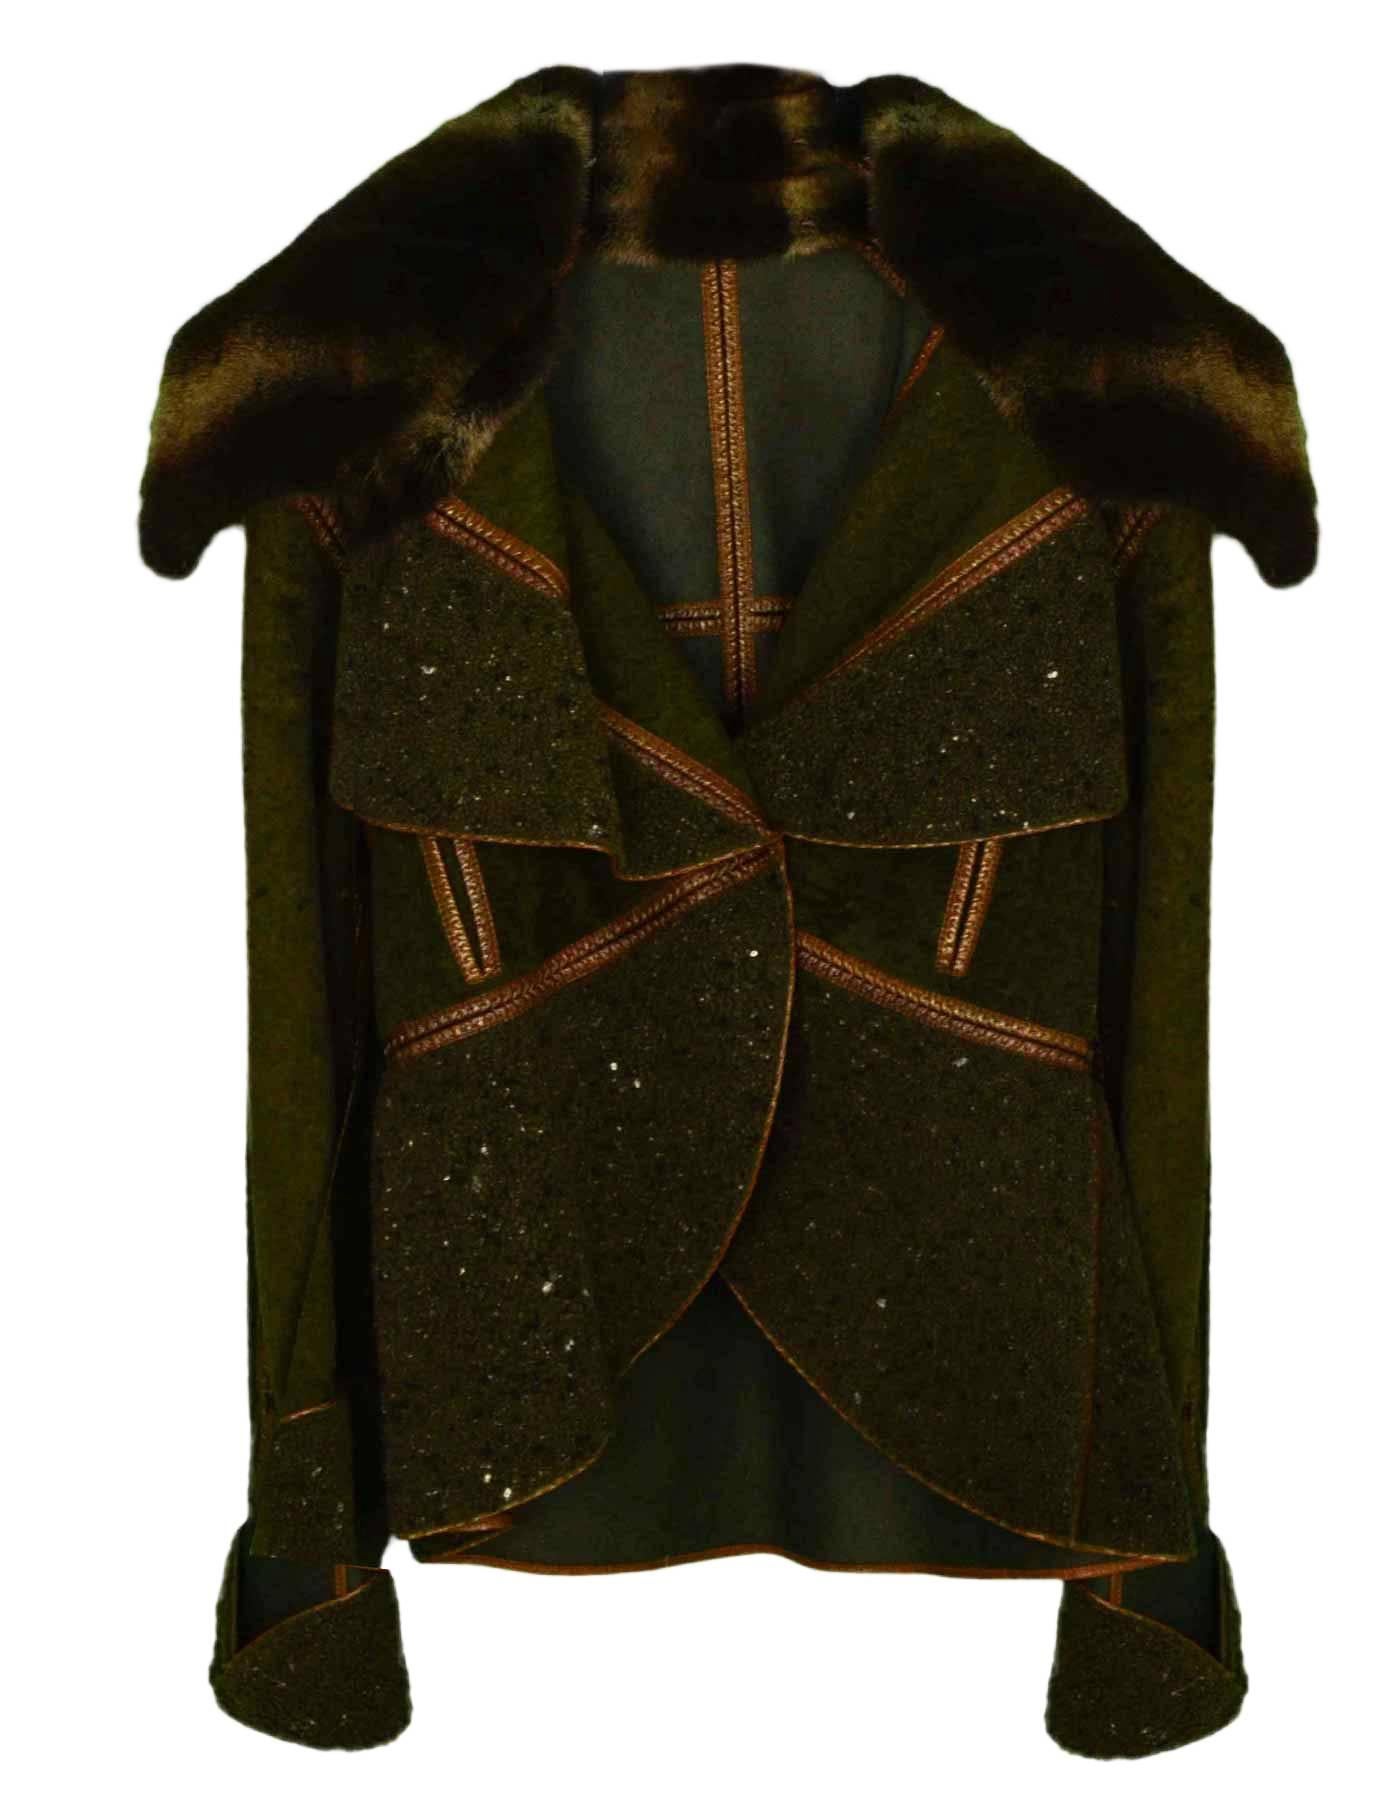 Fendi Fall '05 Runway Olive Green & Brown Reversible Shearling Coat 
Features fur collar and waterfall-style front

Made In: Italy
Color: Olive green and brown
Composition: Fur, leather, shearling and felt
Closure/Opening: Snap front with belt-style